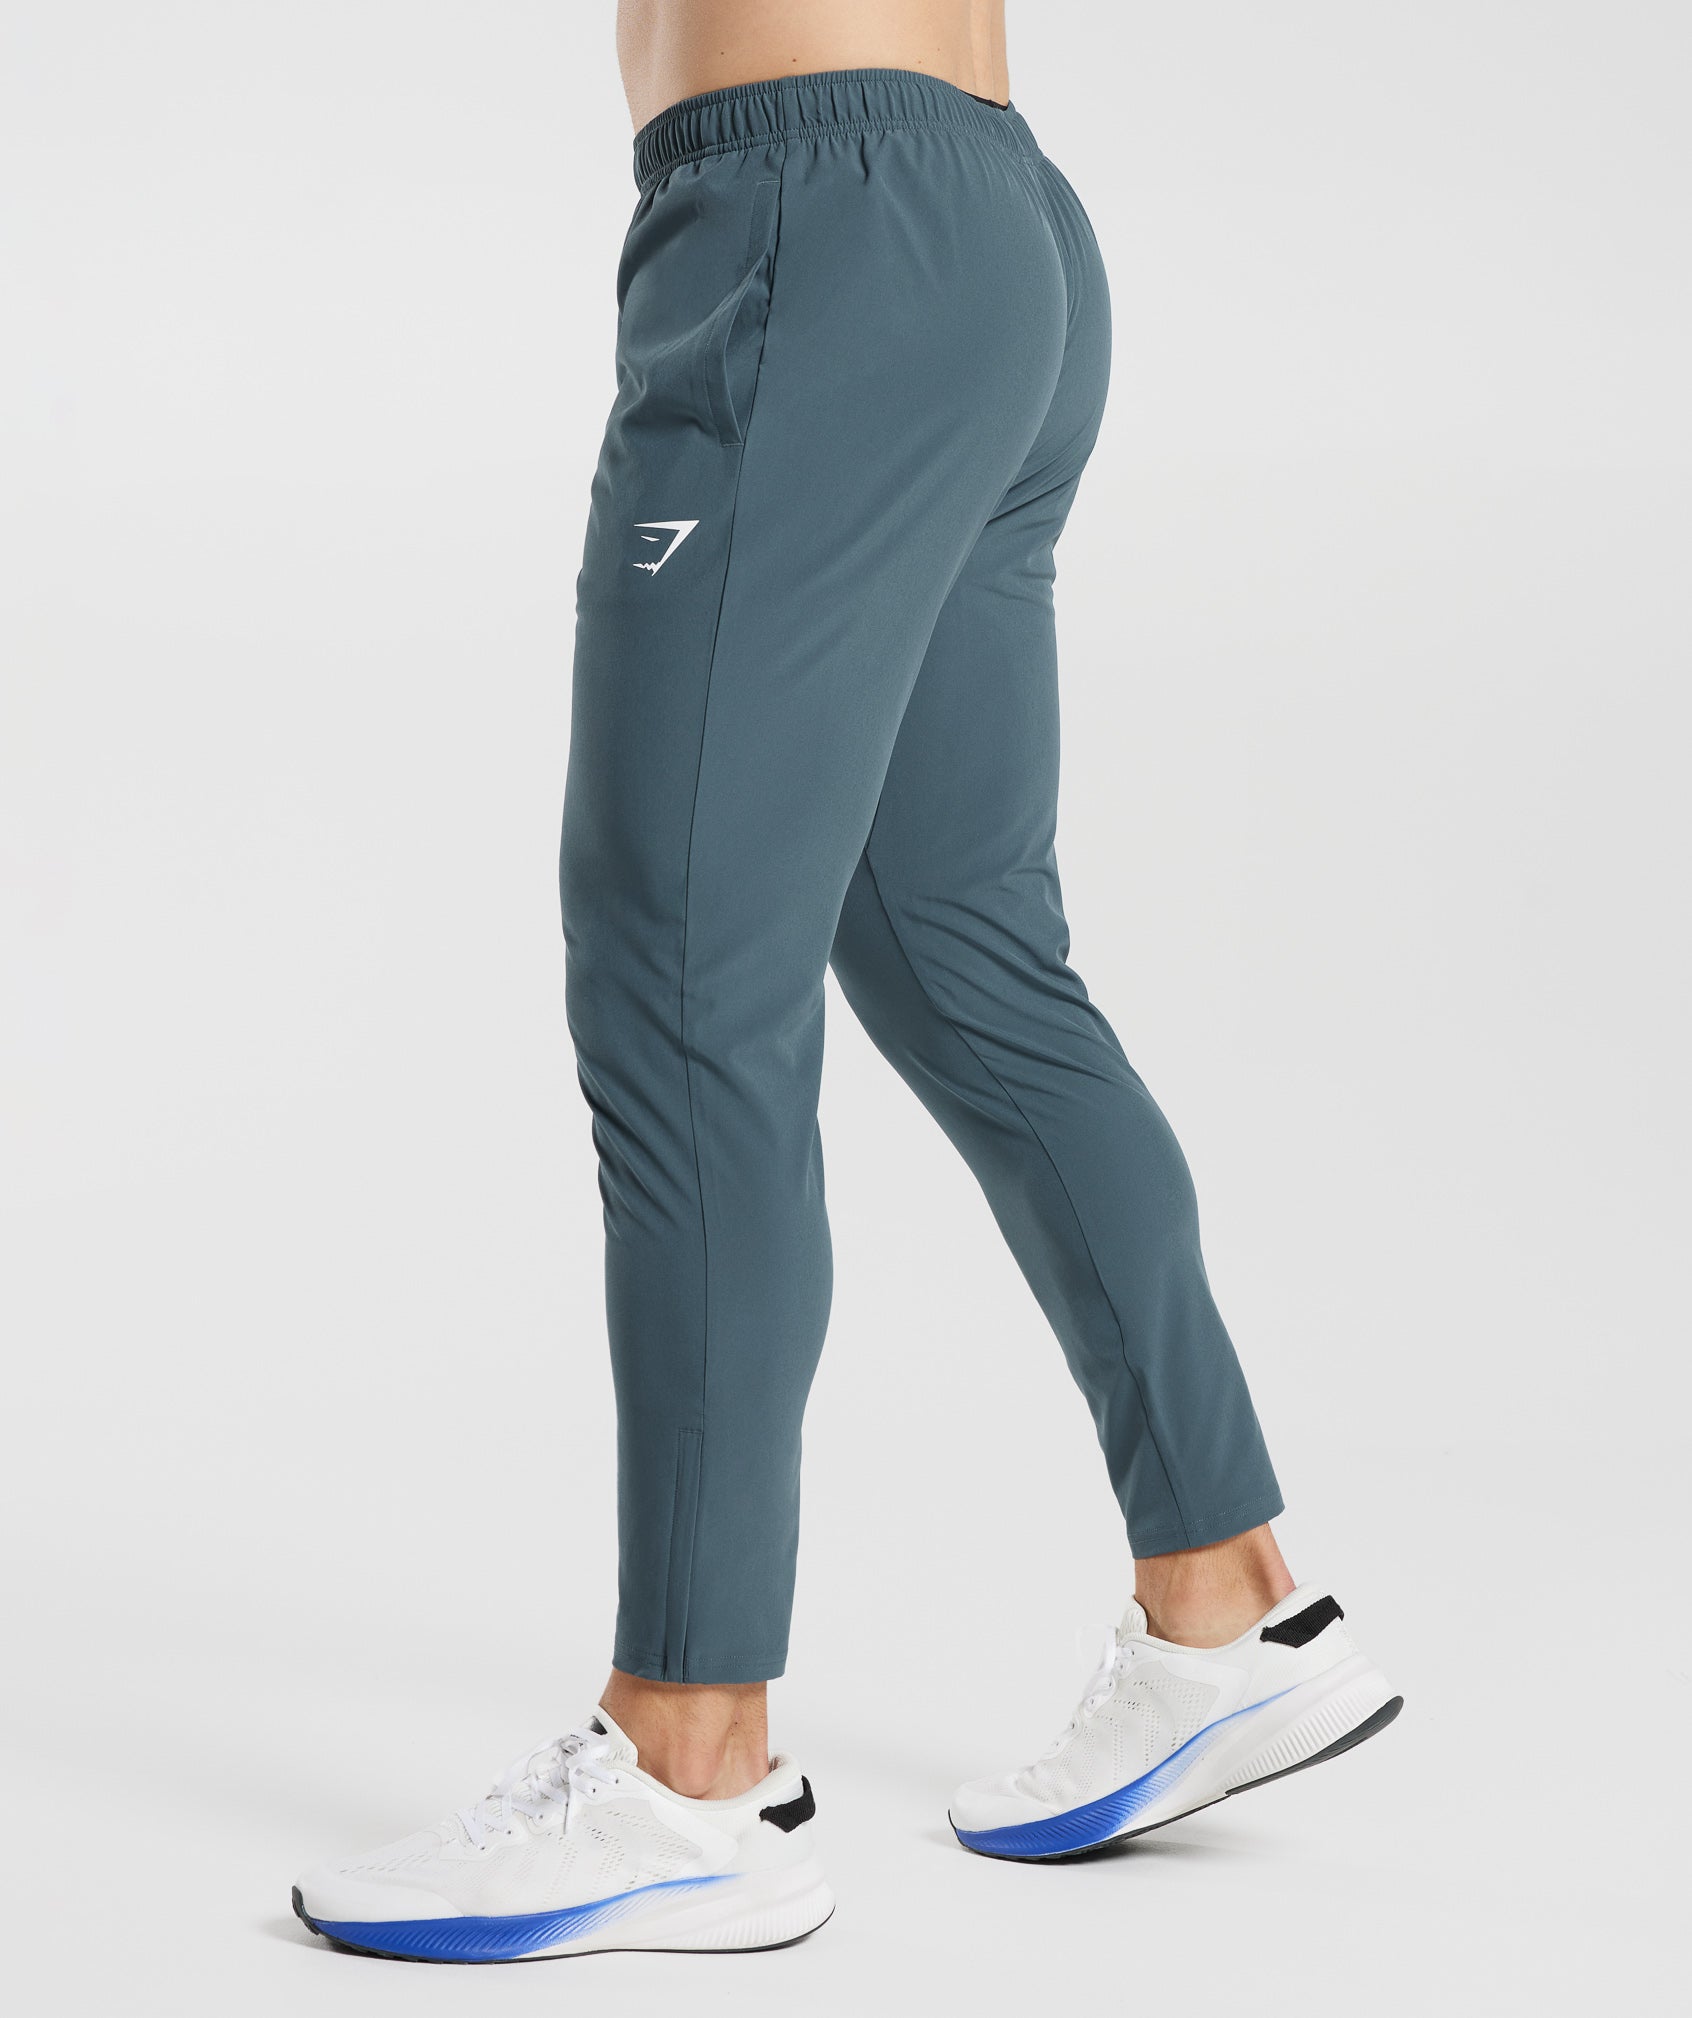 Arrival Jogger in Smokey Teal - view 4